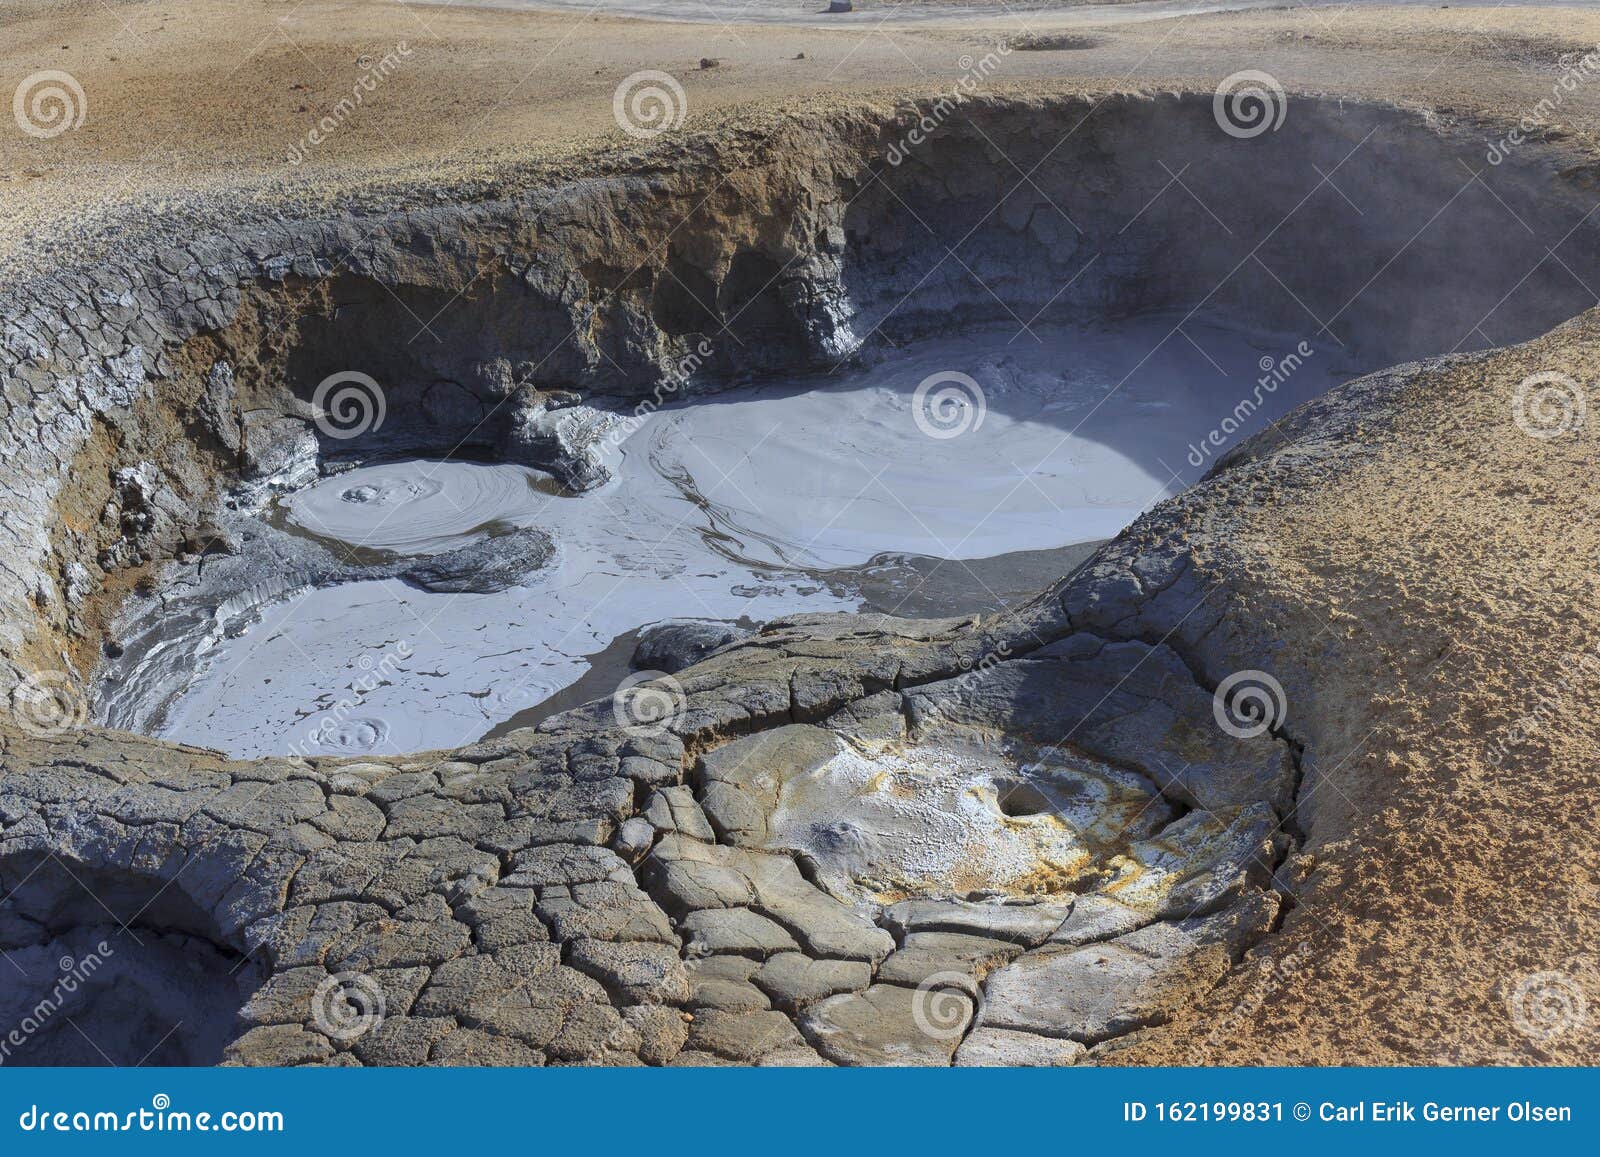 Boiling Mud in Geothermic Area. Hverir, Namafjall, Stock Image - of nature, geology: 162199831